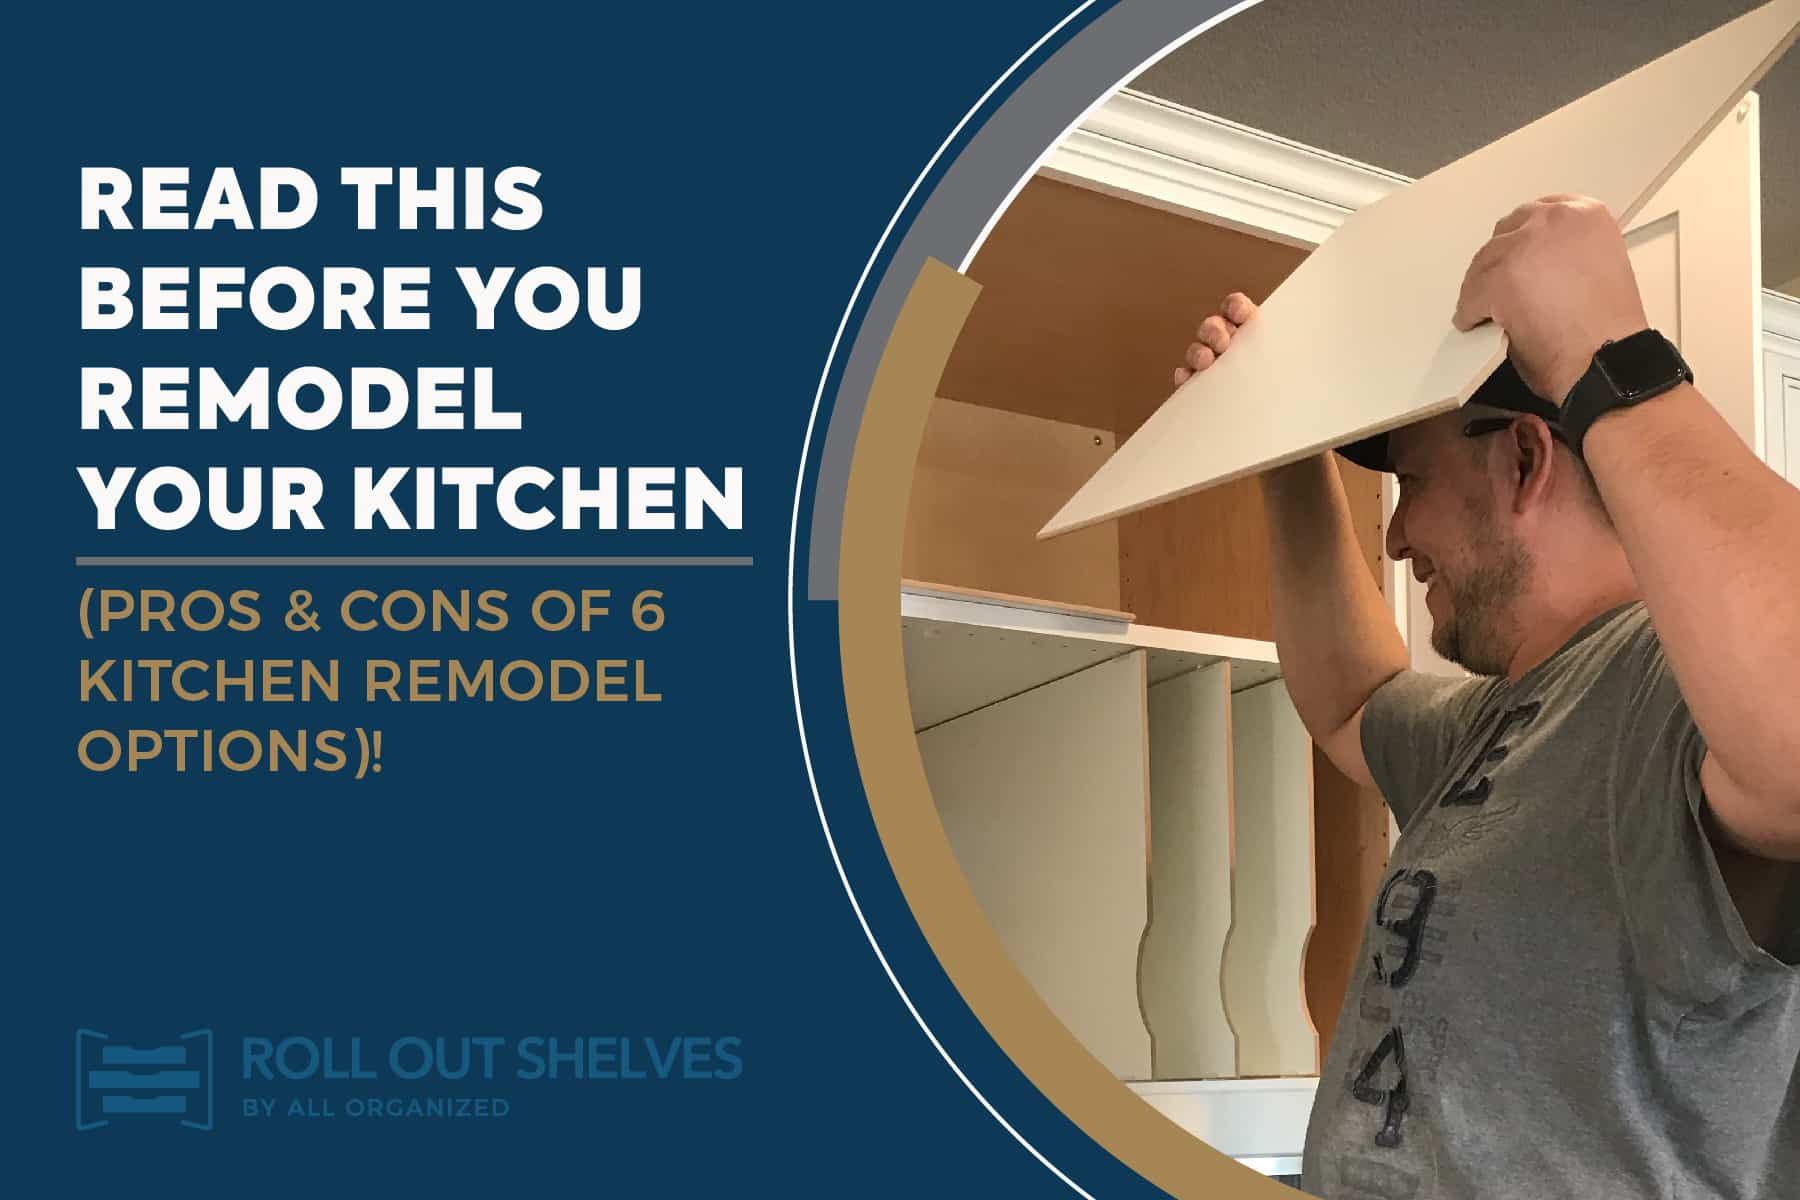 Read This Before You Remodel Your Kitchen (pros & cons of 6 kitchen remodel options)! 19